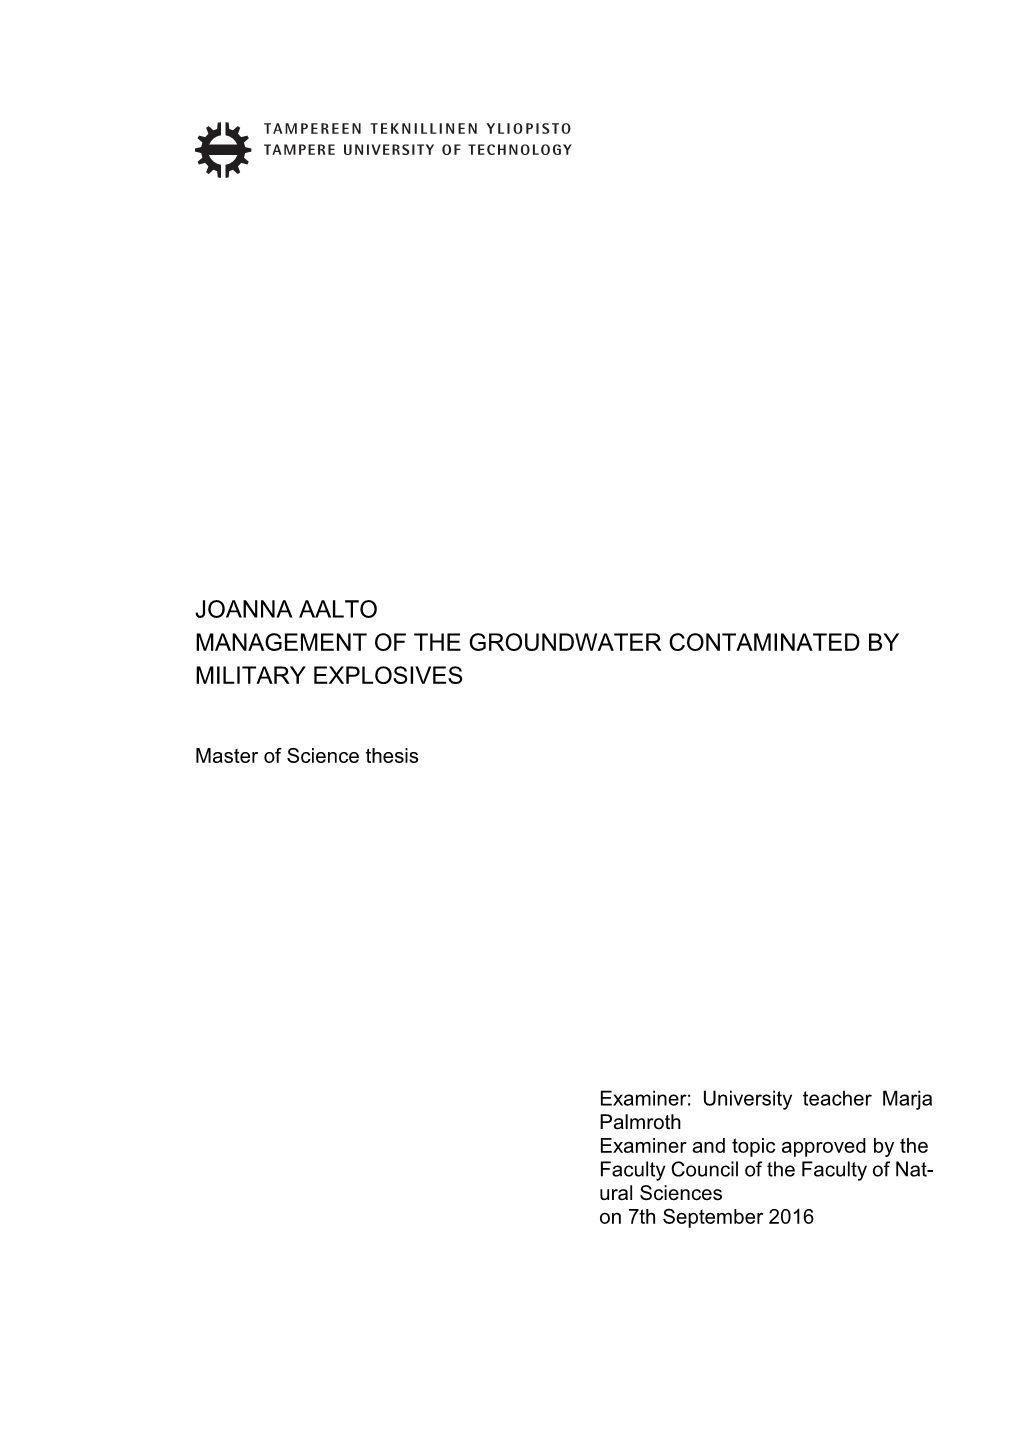 Joanna Aalto Management of the Groundwater Contaminated by Military Explosives